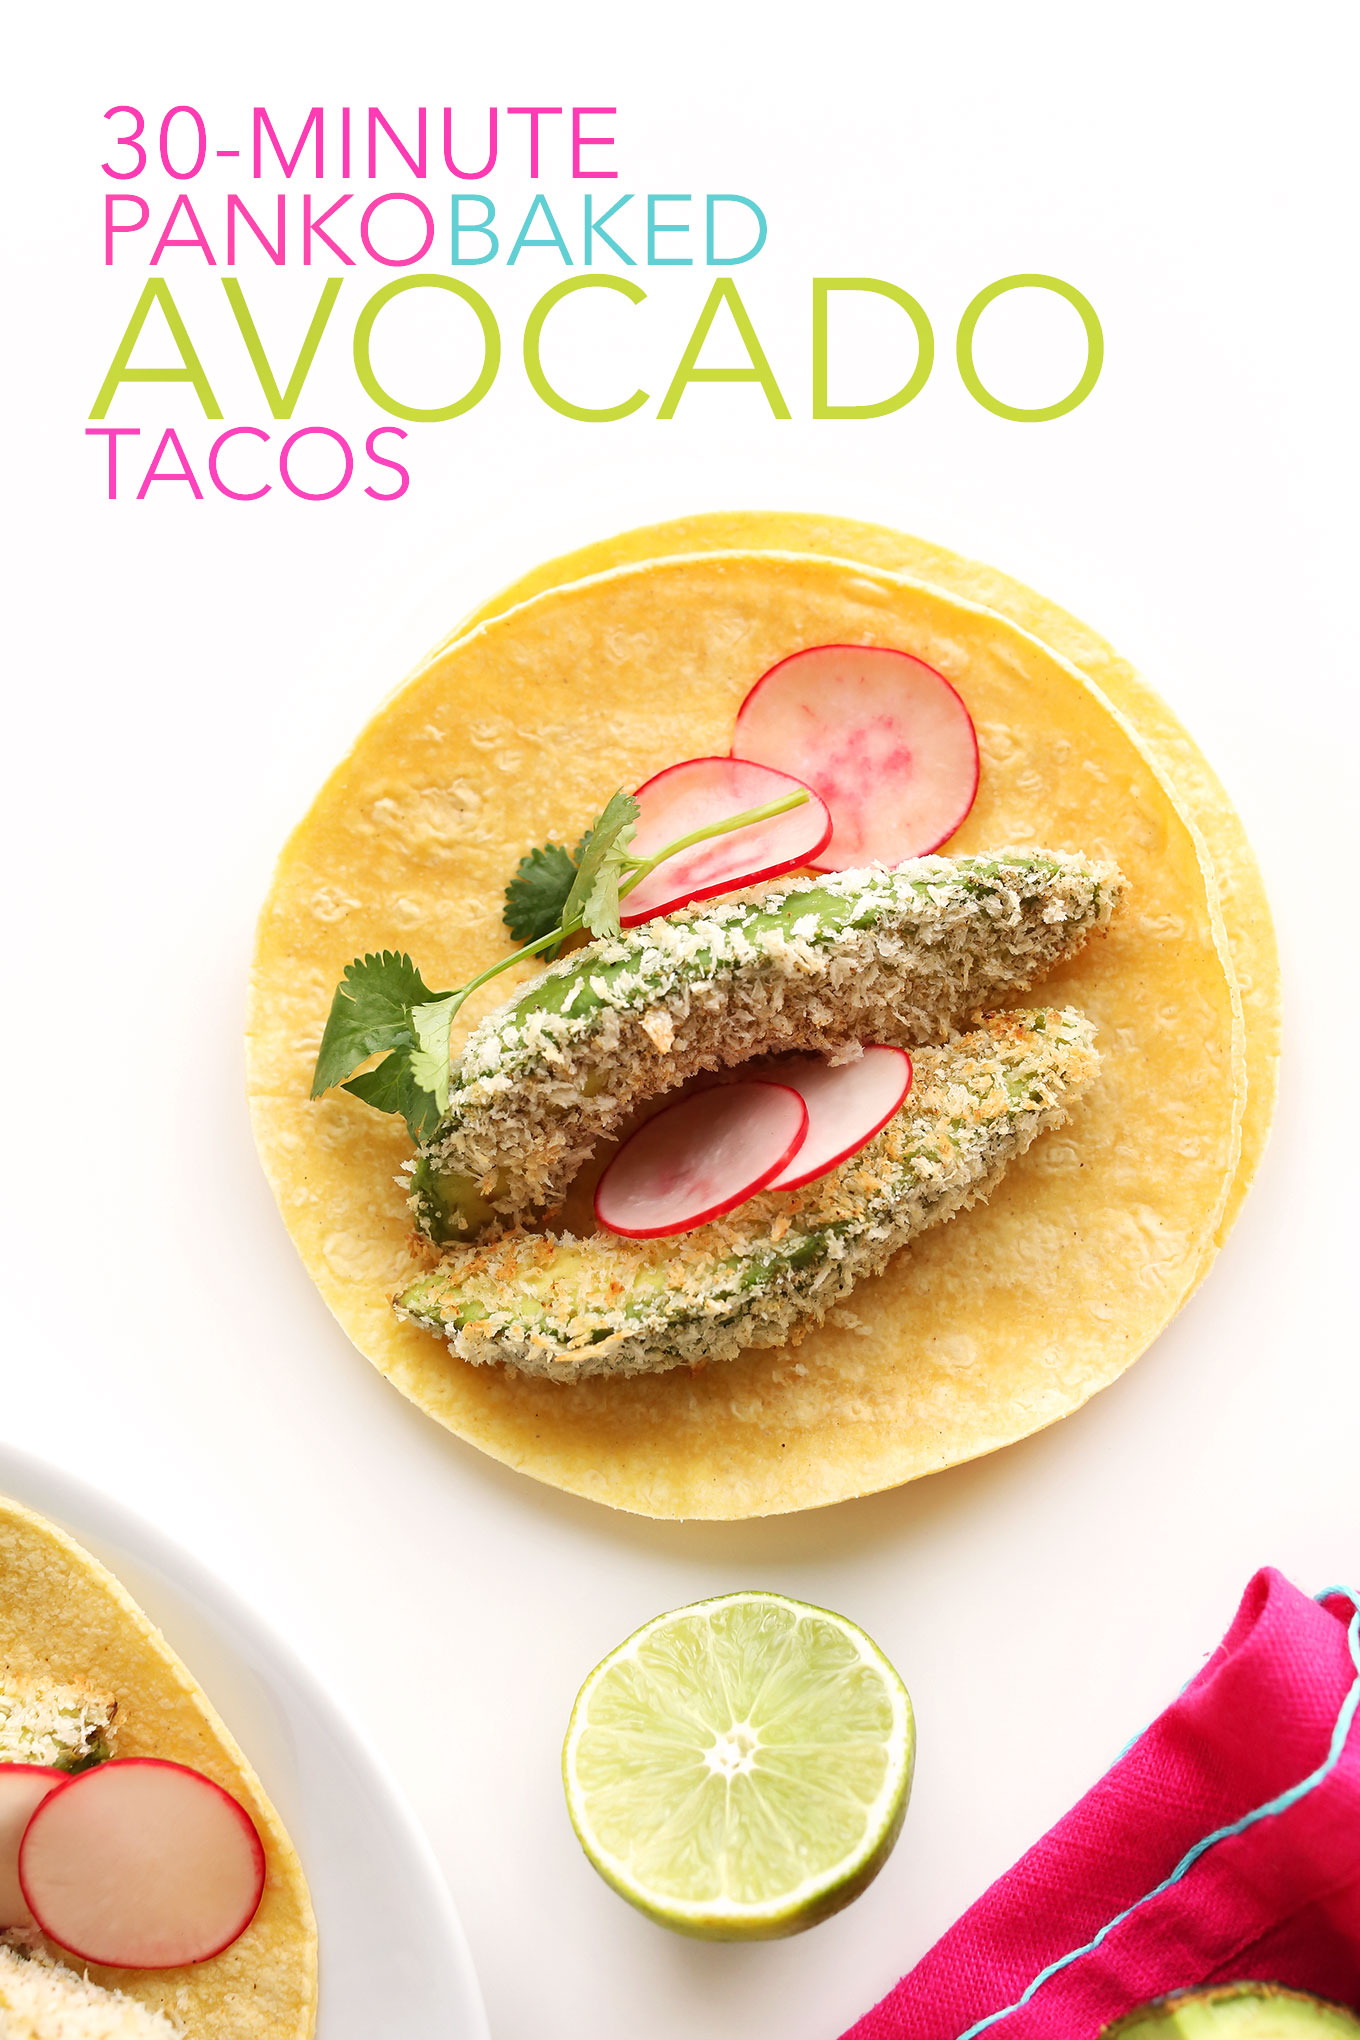 Corn tortillas topped with crunchy Panko Avocados, radishes, and fresh cilantro